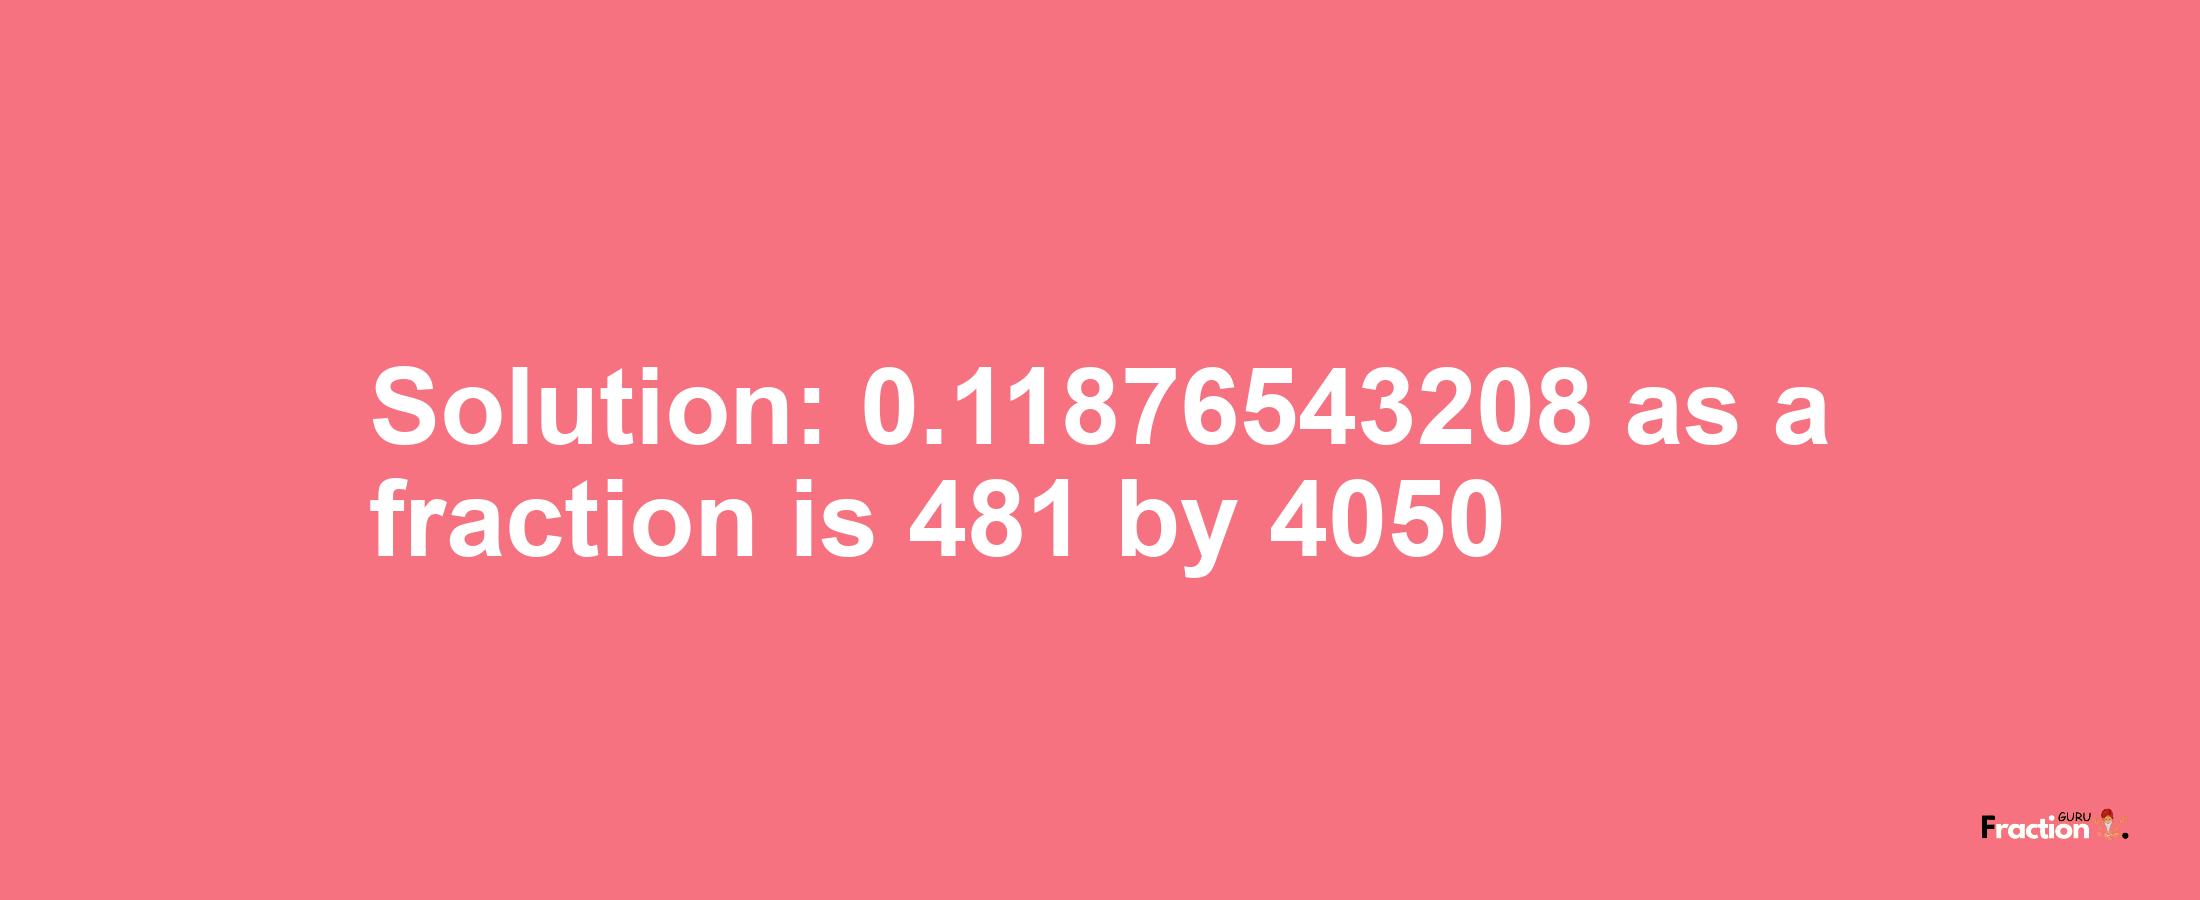 Solution:0.11876543208 as a fraction is 481/4050